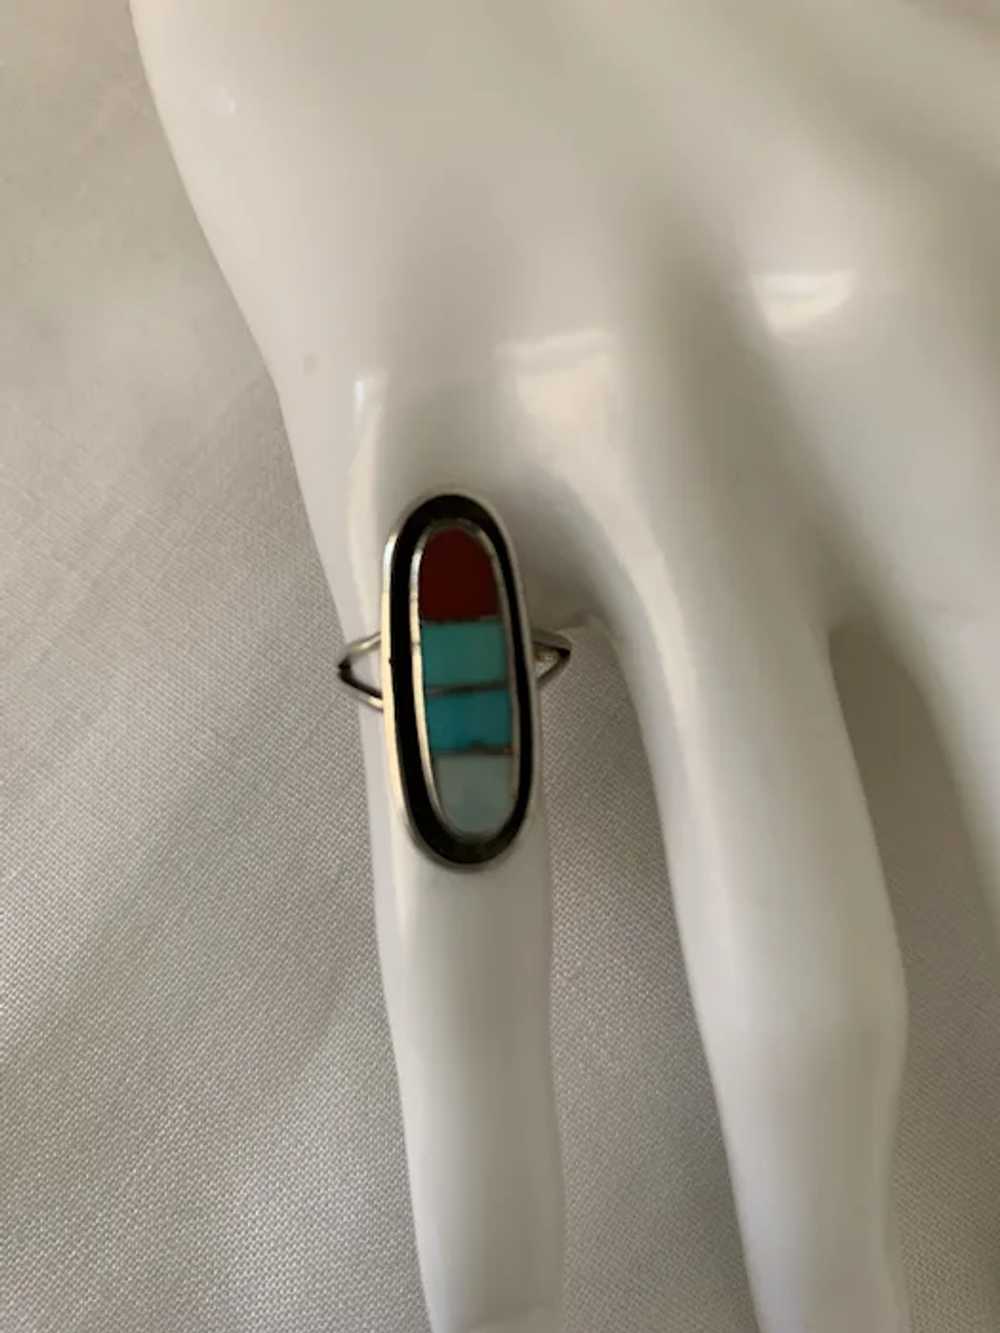 Zuni Inlay Ring Size 5 - Turquoise, Coral. MOP - image 3